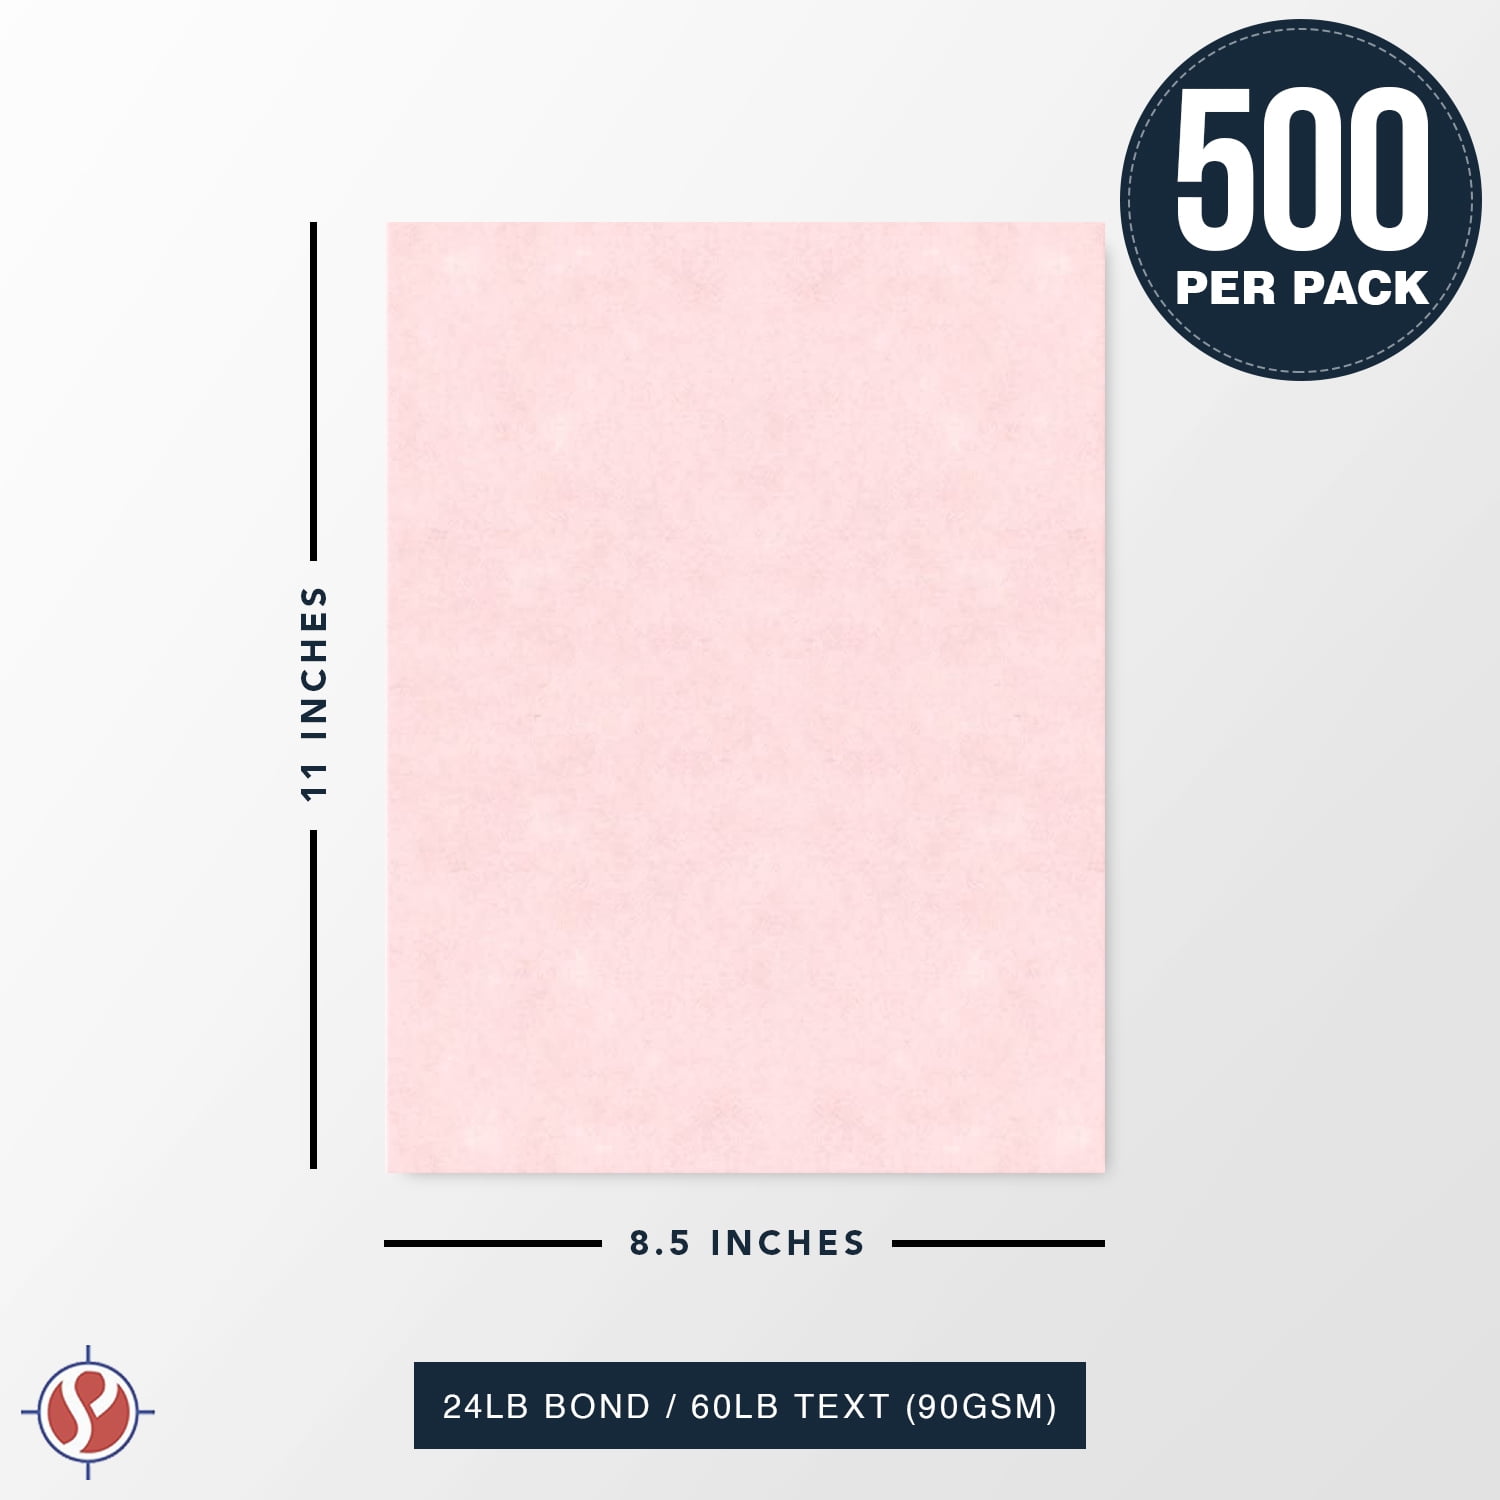 Pink A4 Two Tone Parchment Paper x10 – Claritystamp